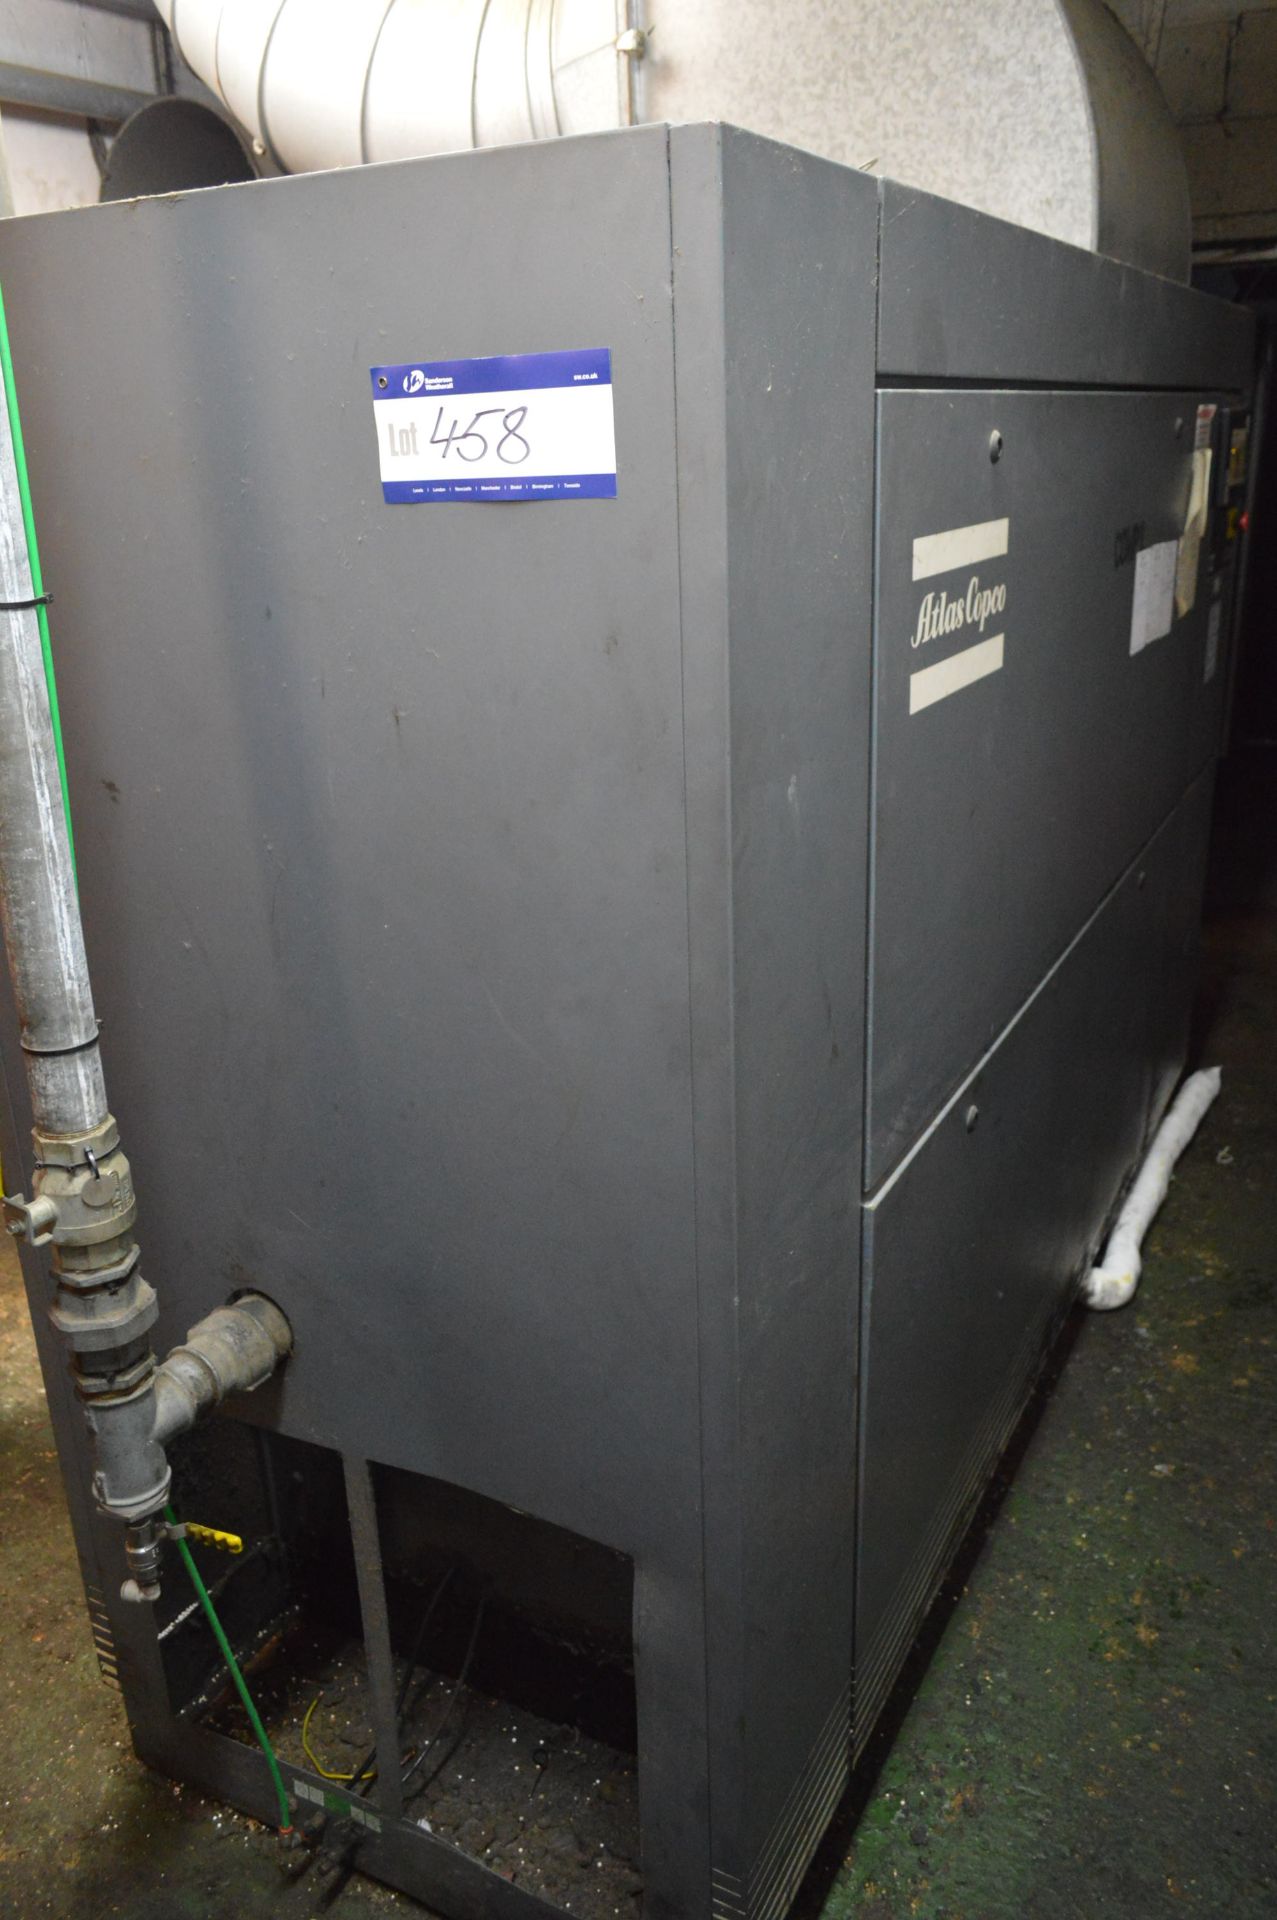 Atlas Copco GA56 Package Air Compressor, serial no. AII453528, year of manufacture 1994 (note - this